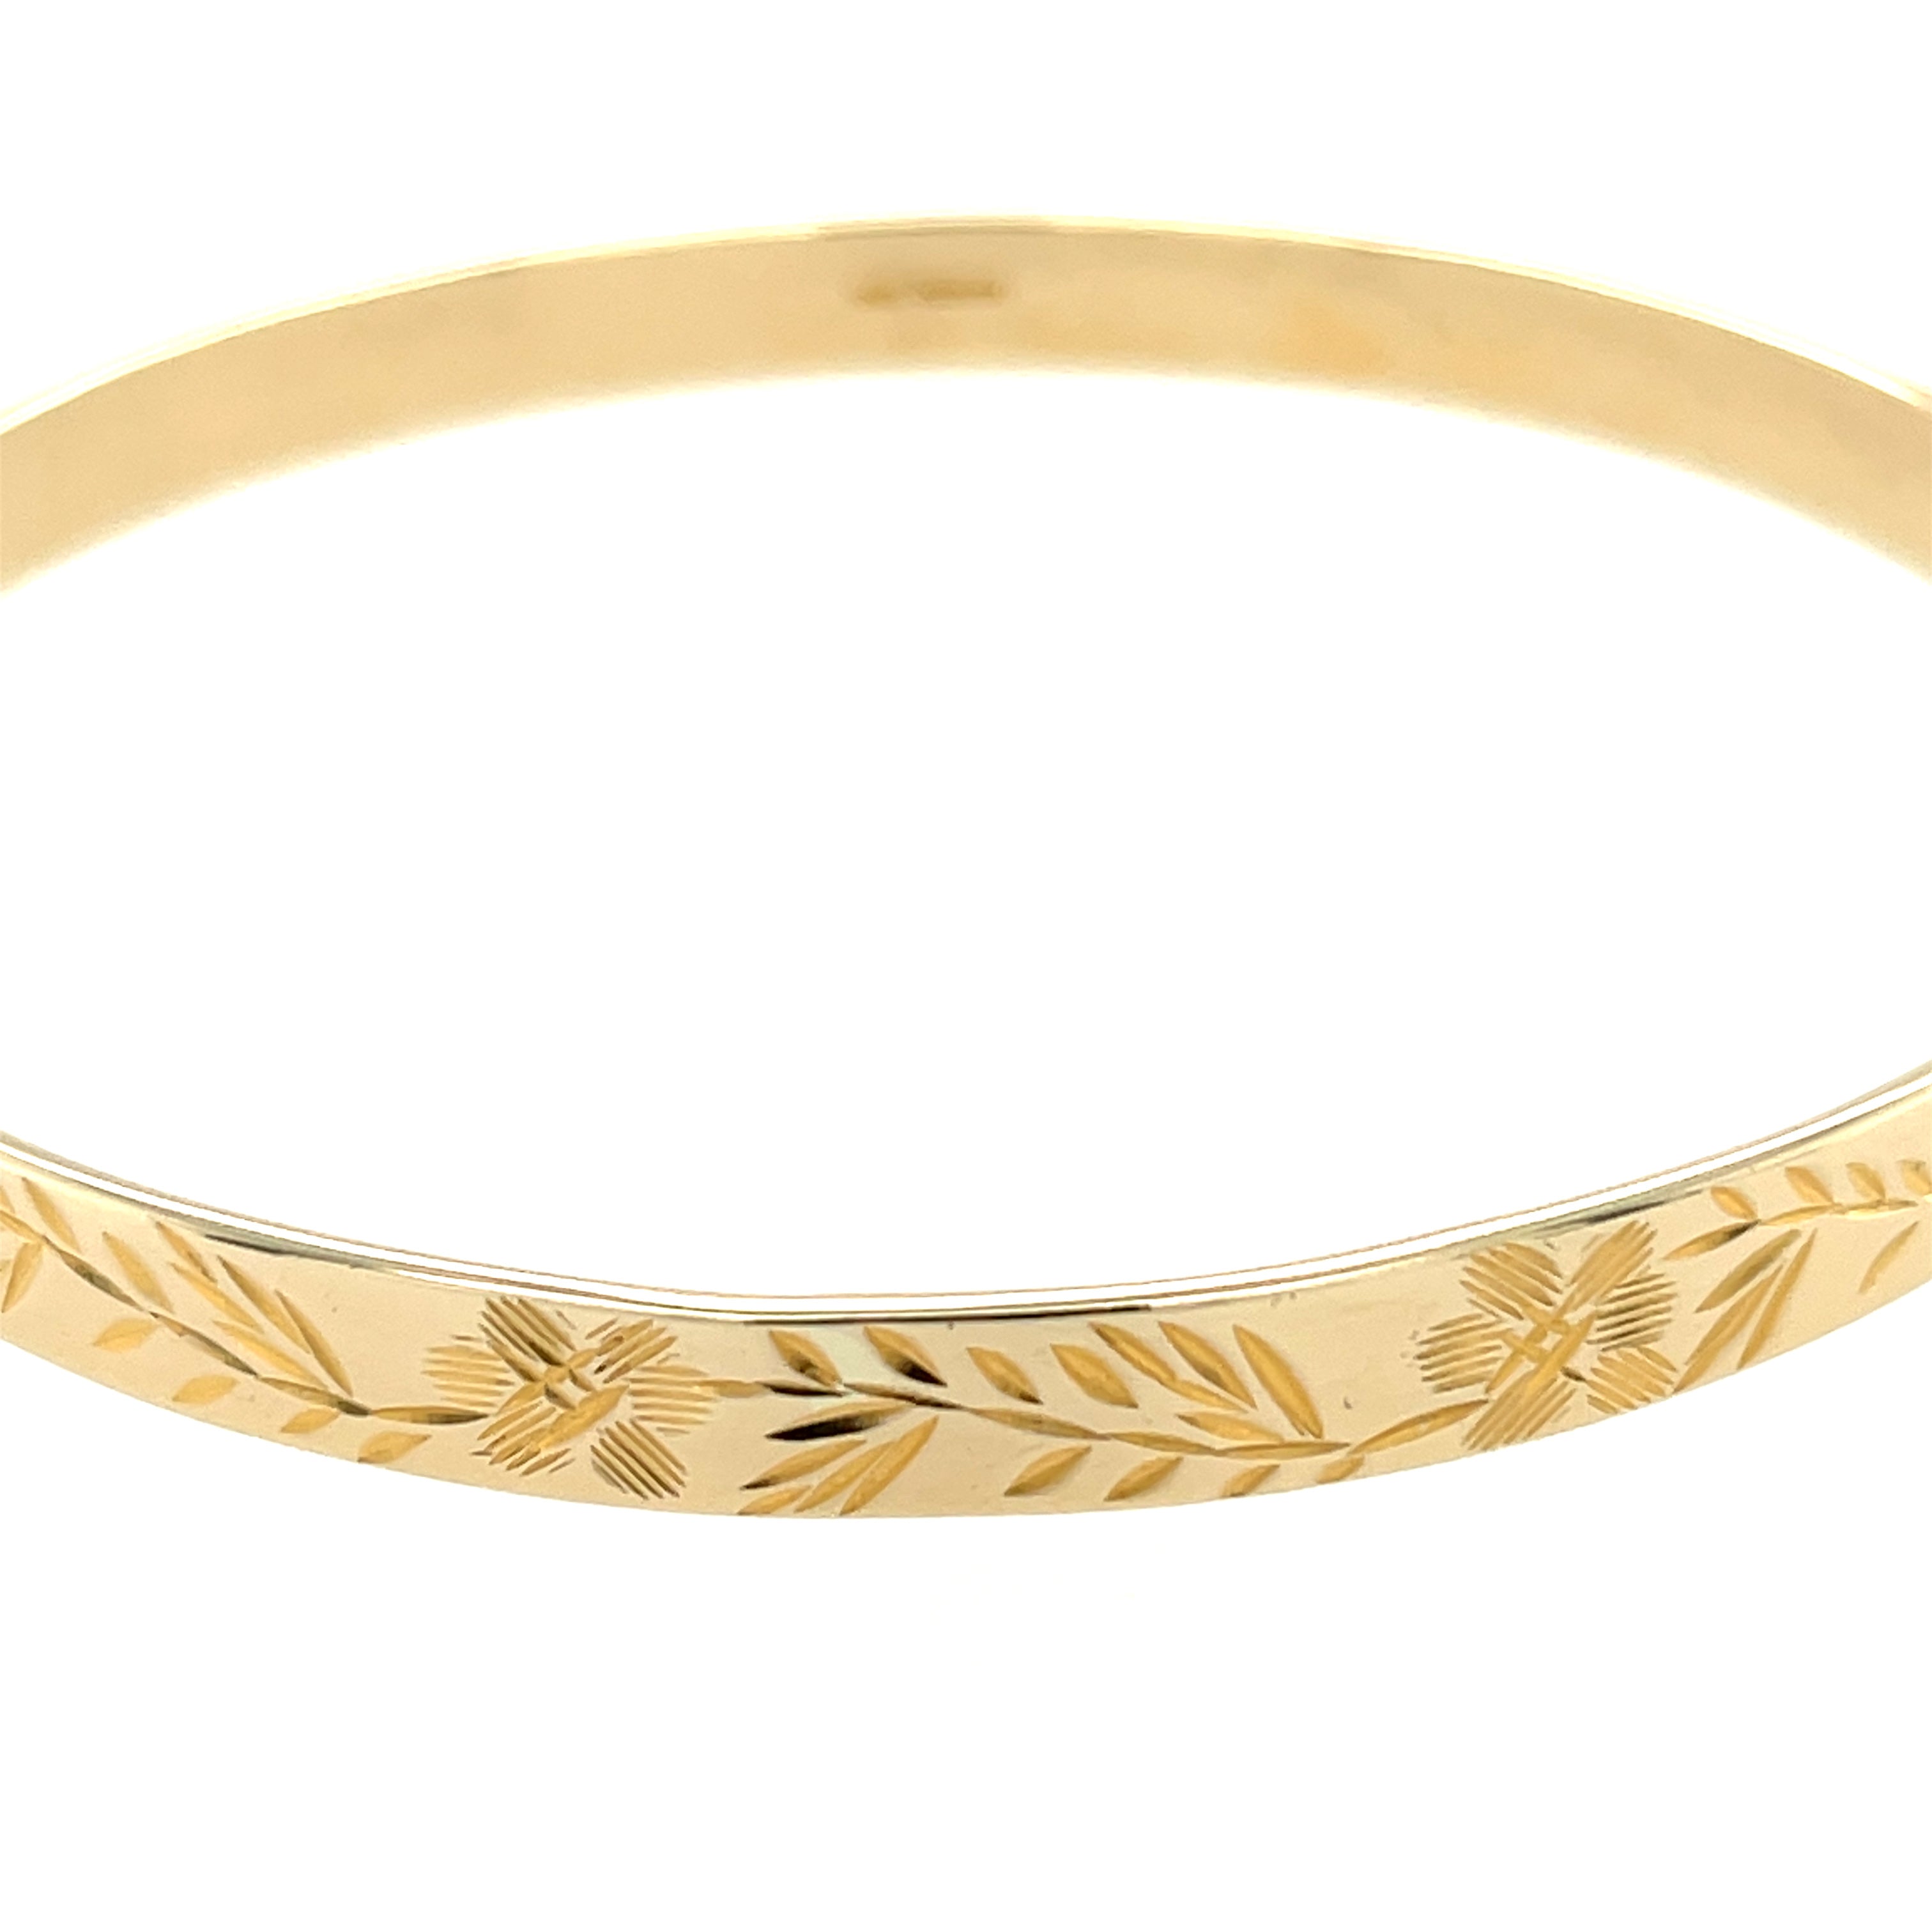 Vintage 1974 9ct Yellow Gold Patterned 5mm Solid Slave Bangle